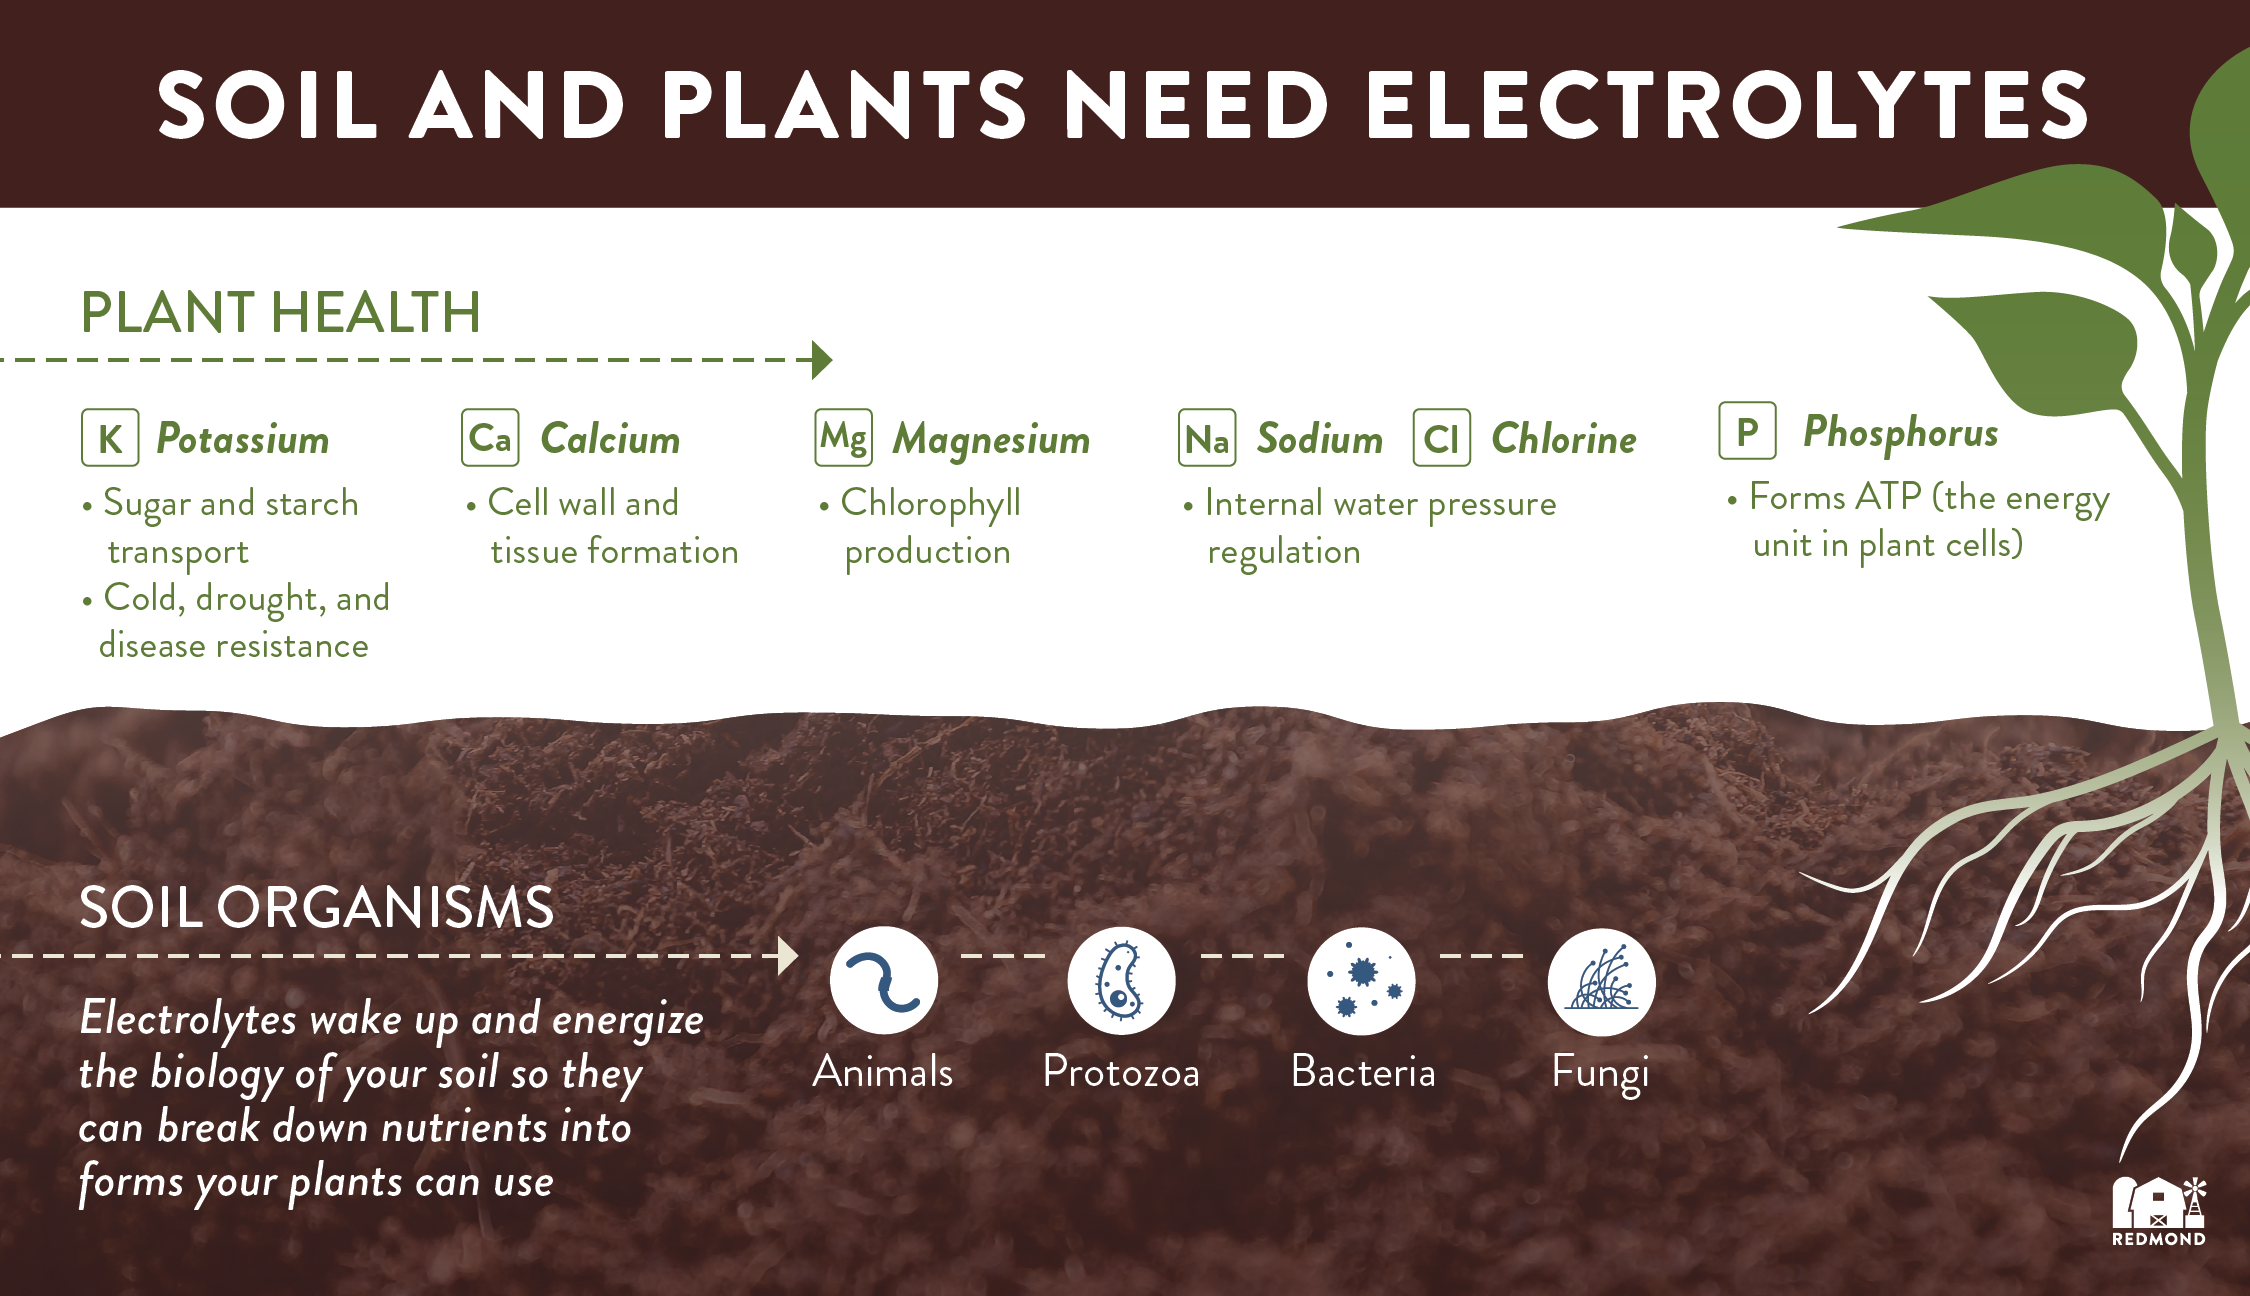 Soil and plants need electrolytes